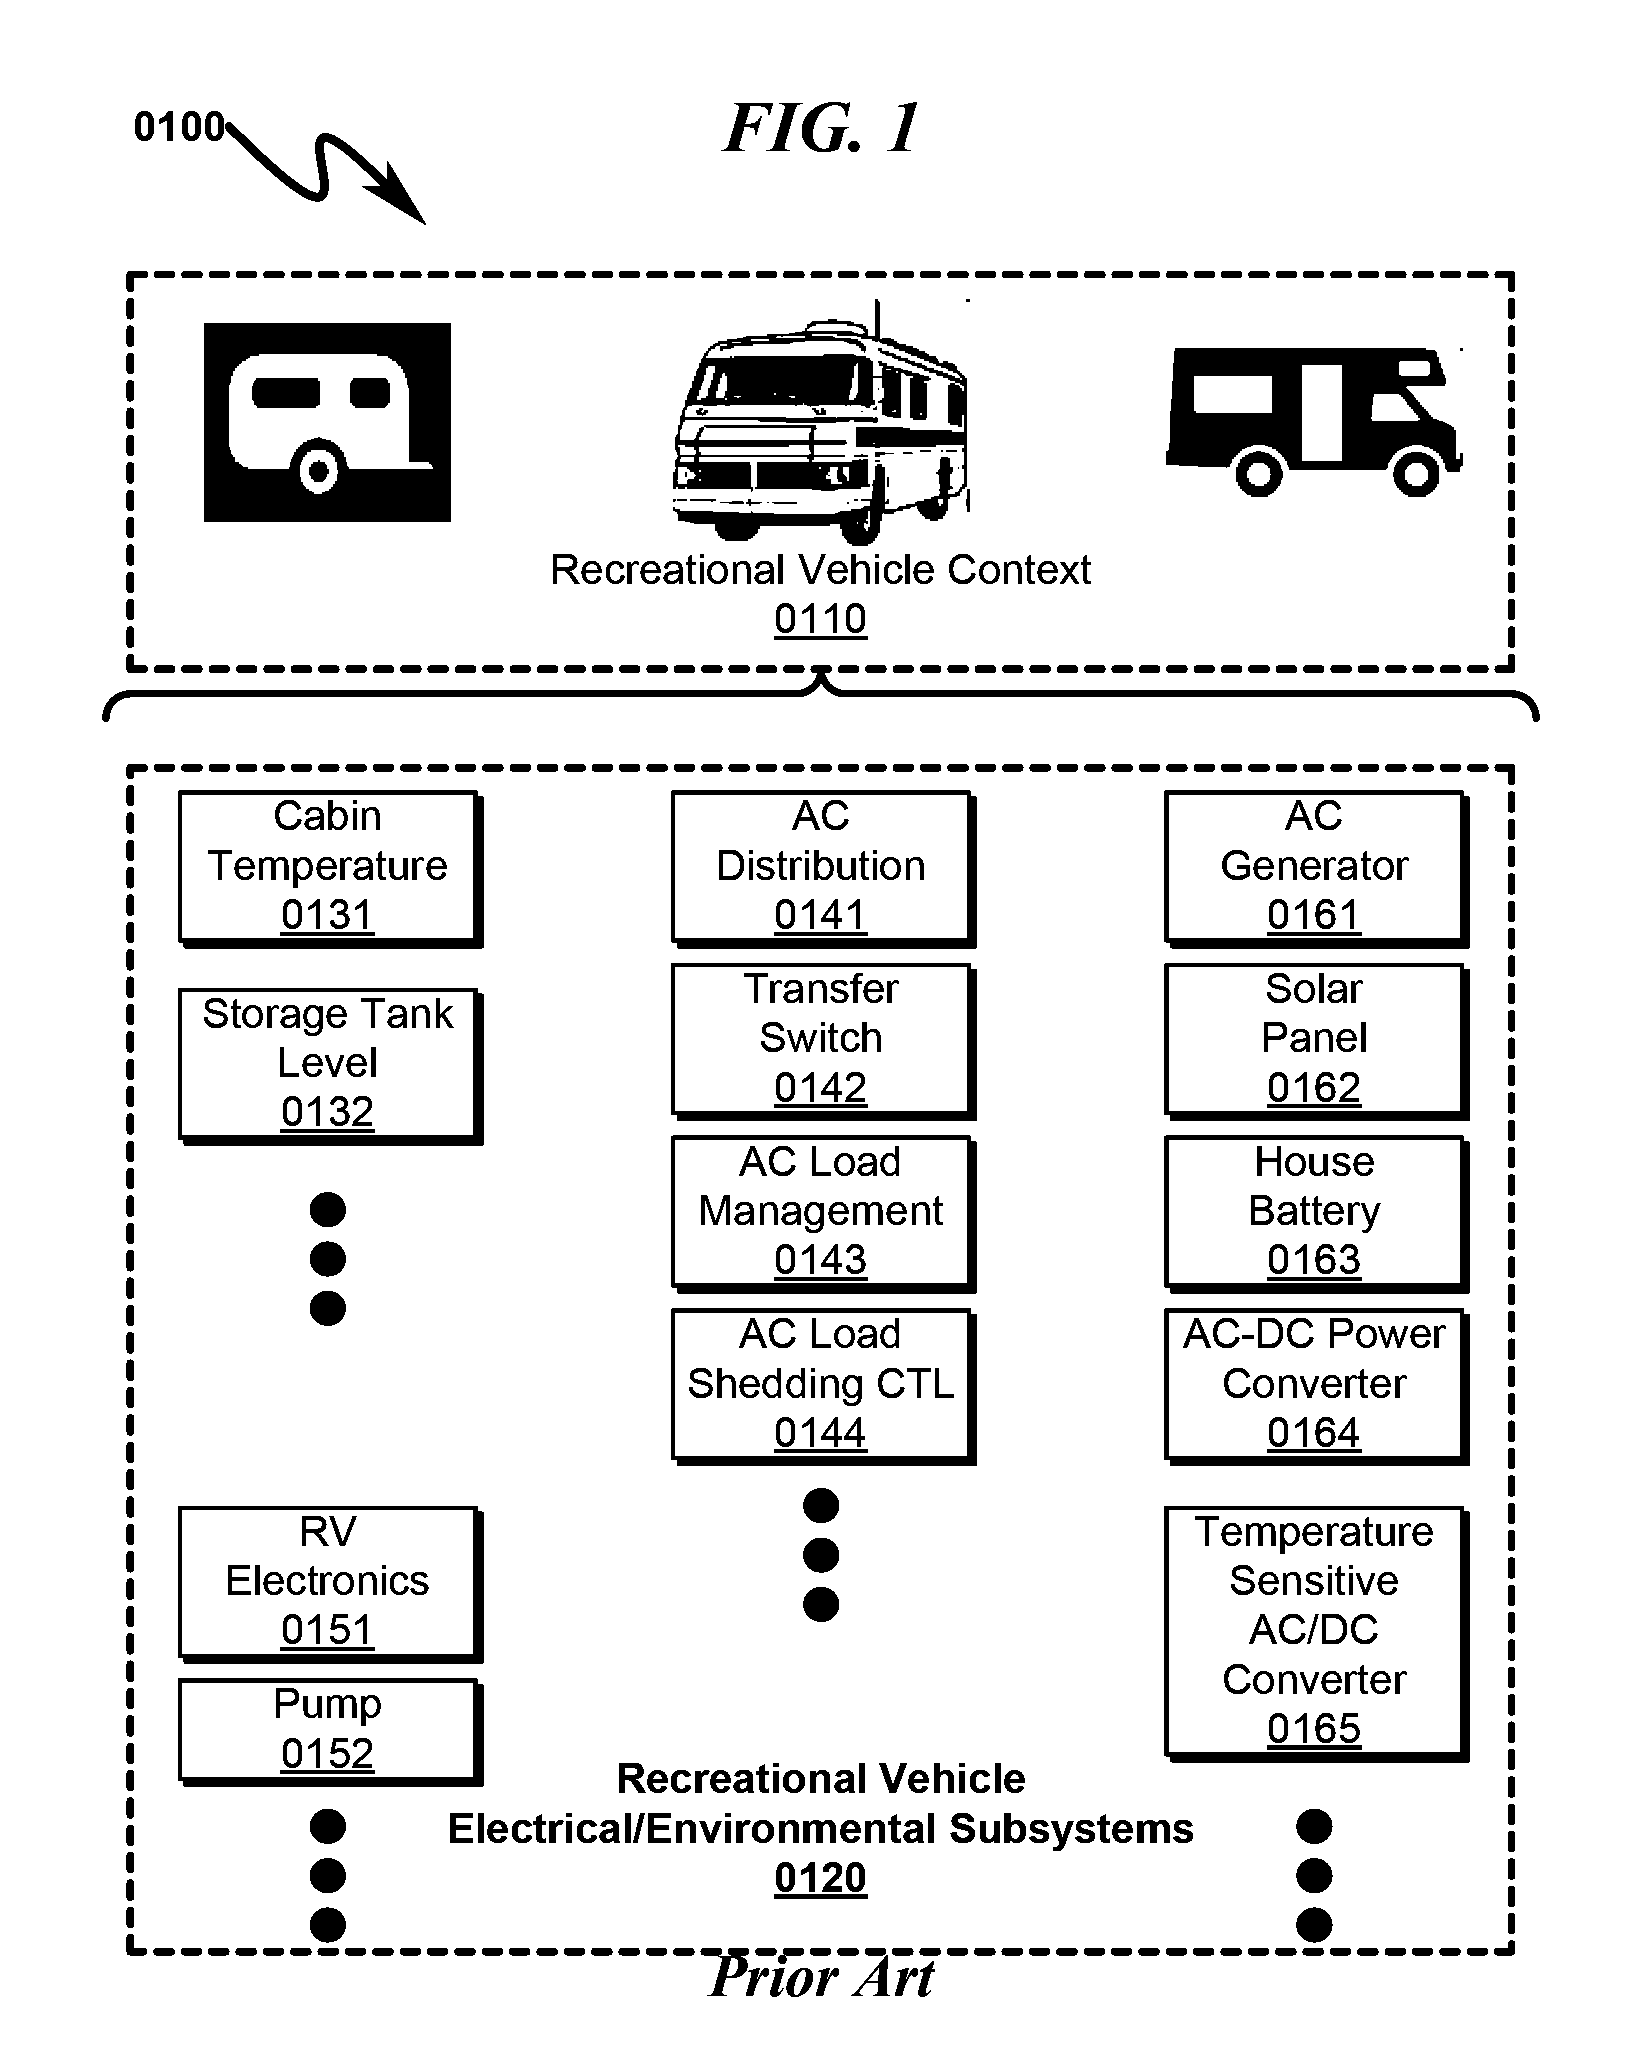 Recreational Vehicle User Interface System and Method